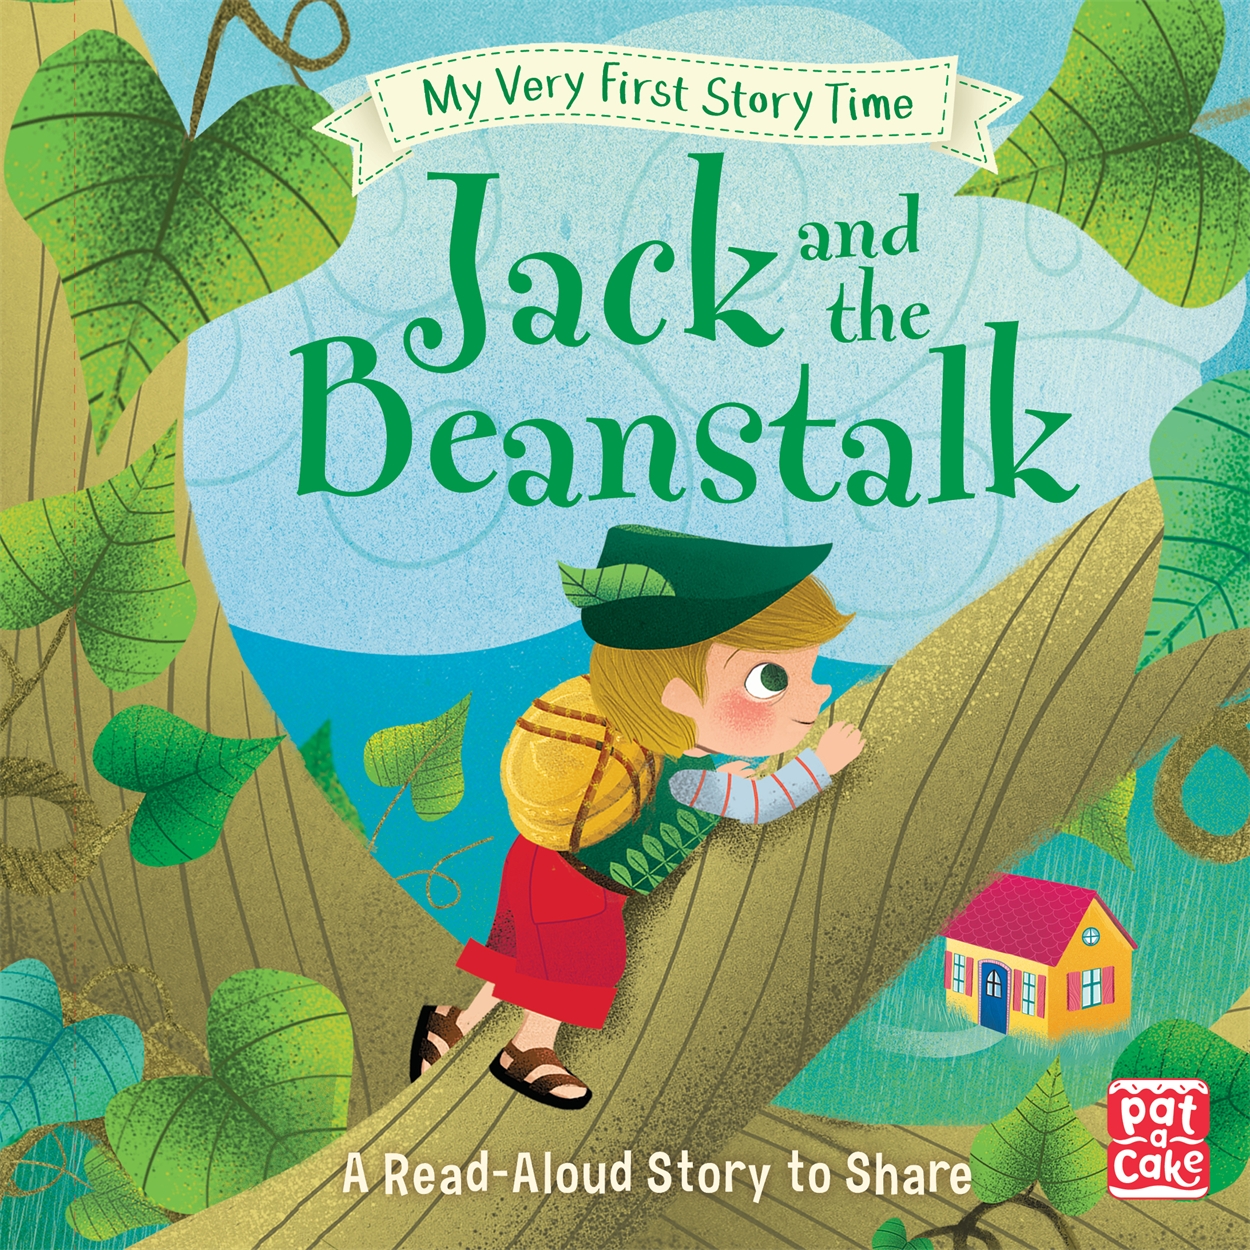 book review of jack and the beanstalk